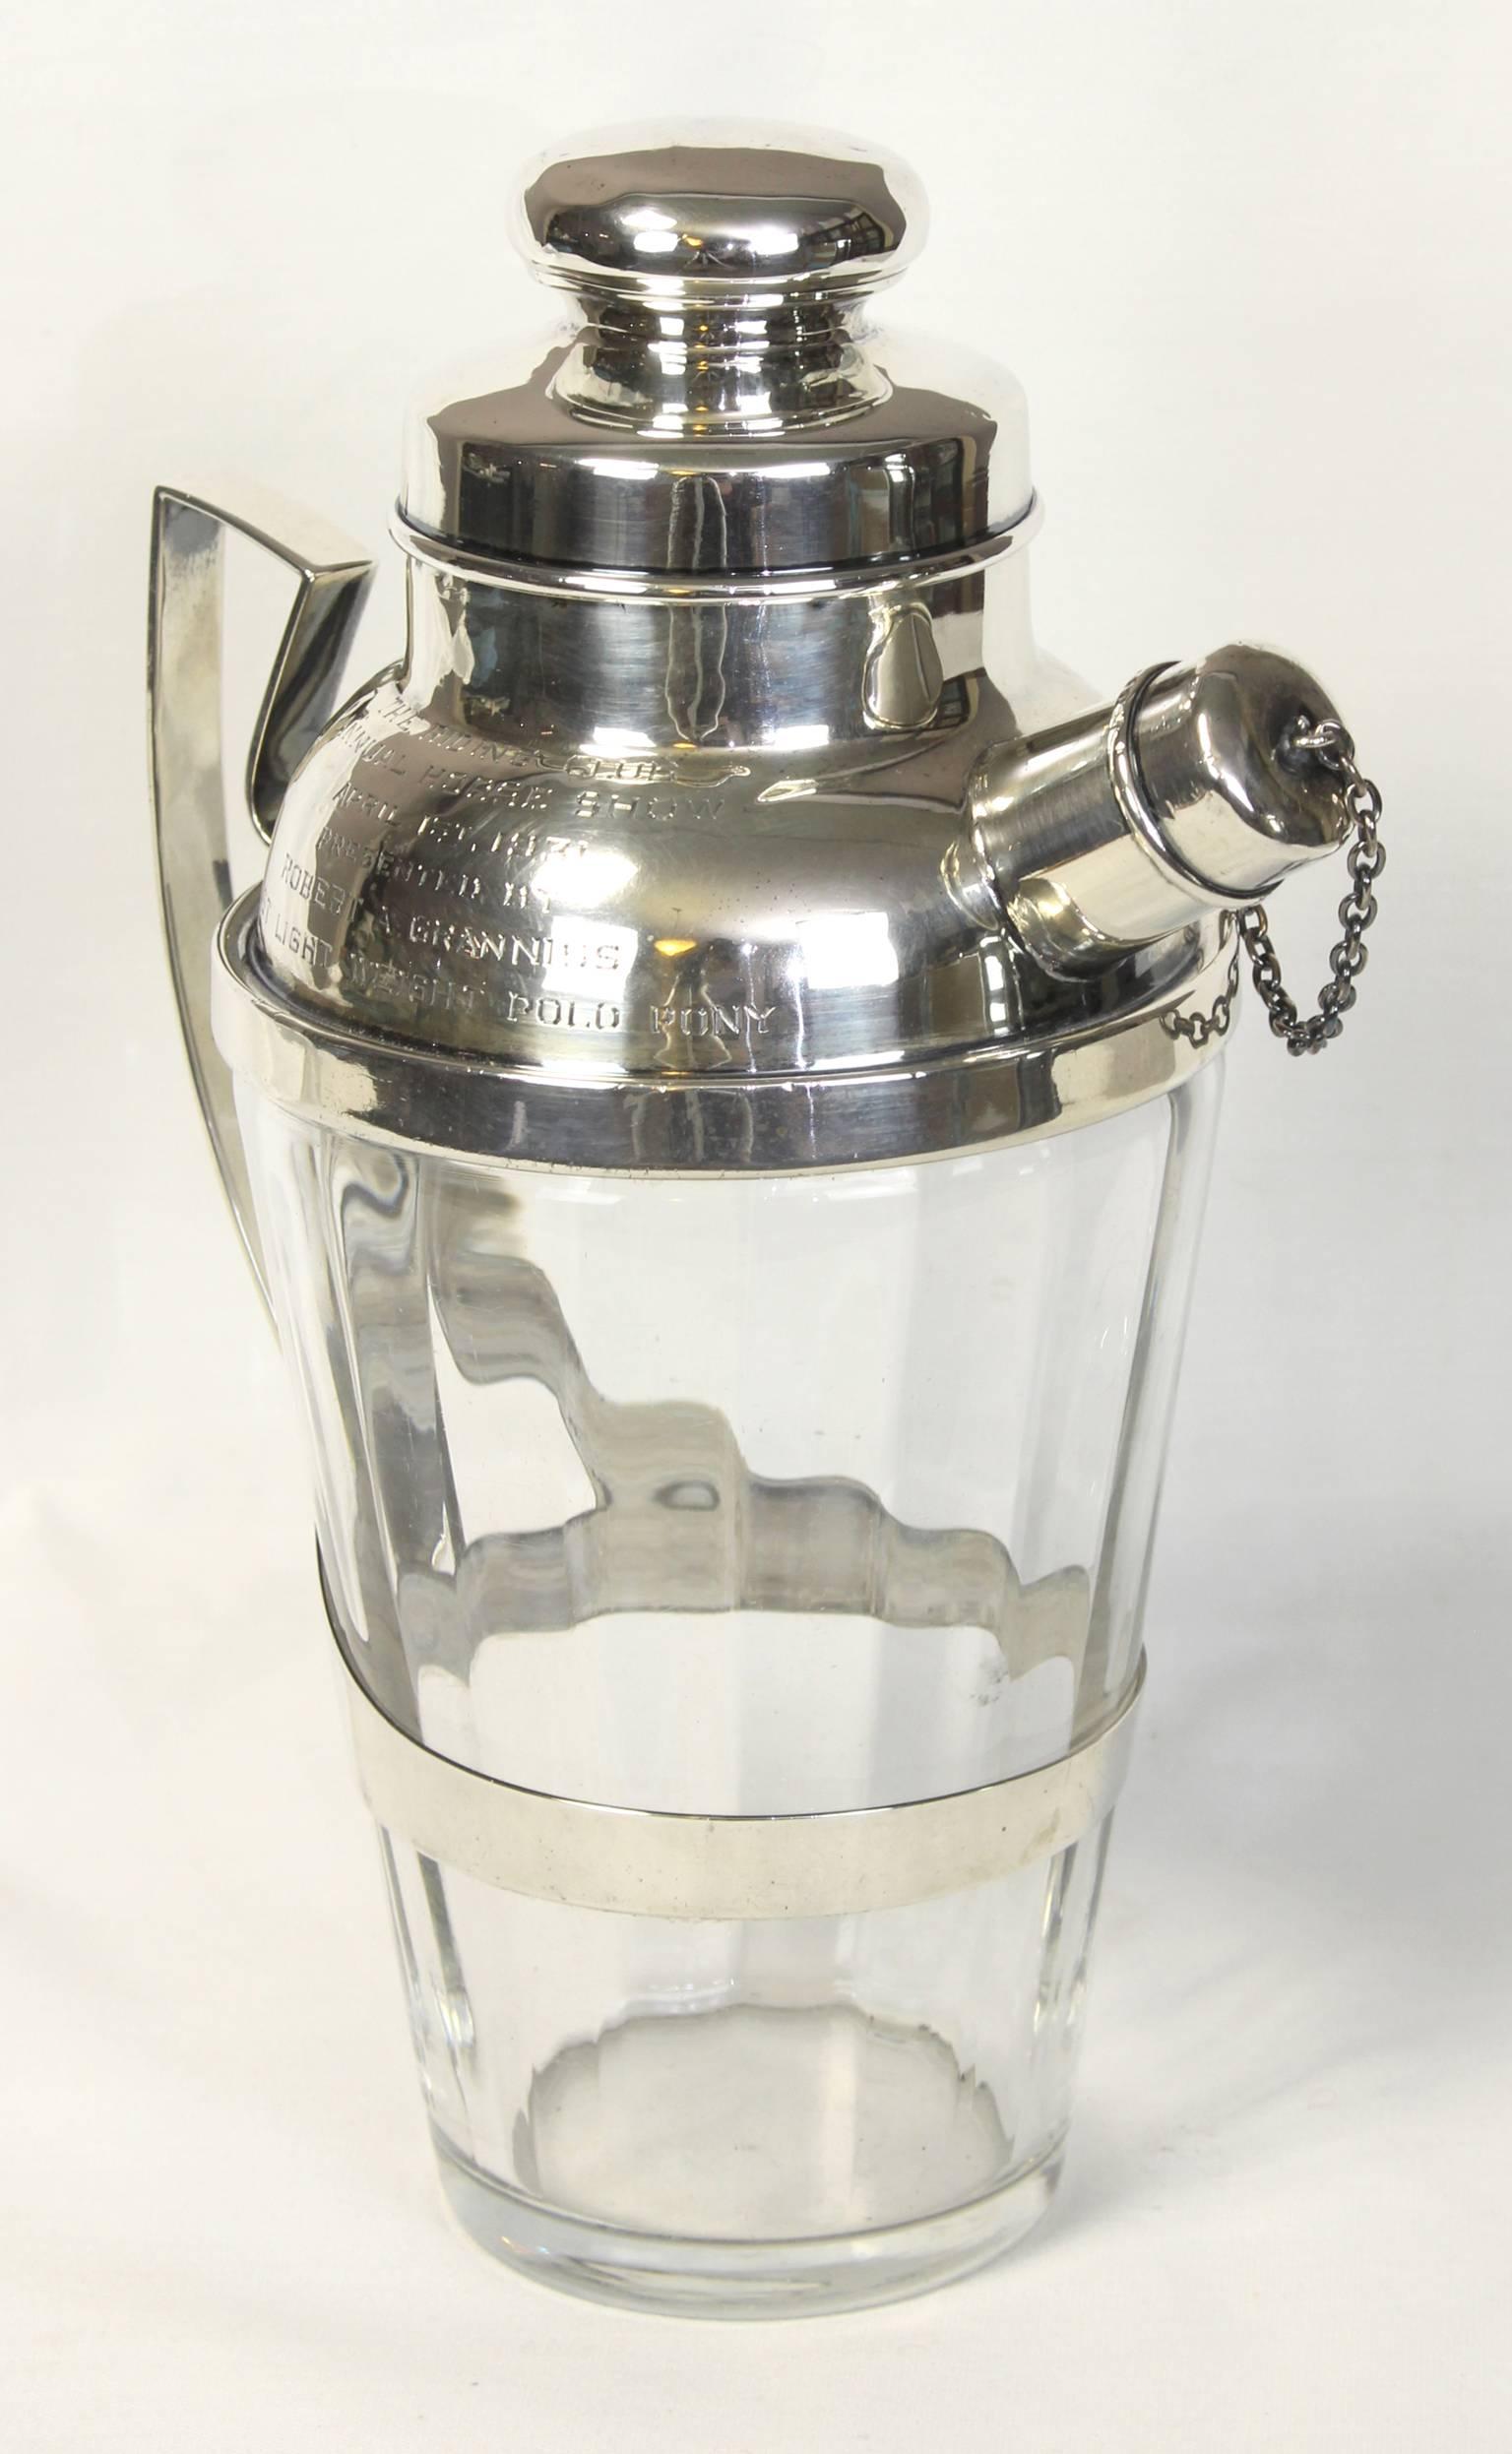 A beautifully engraved sterling silver and crystal cocktail Shaker dating from the early 1930s. The Shaker was presented as a trophy for the winner of an equestrian competition.